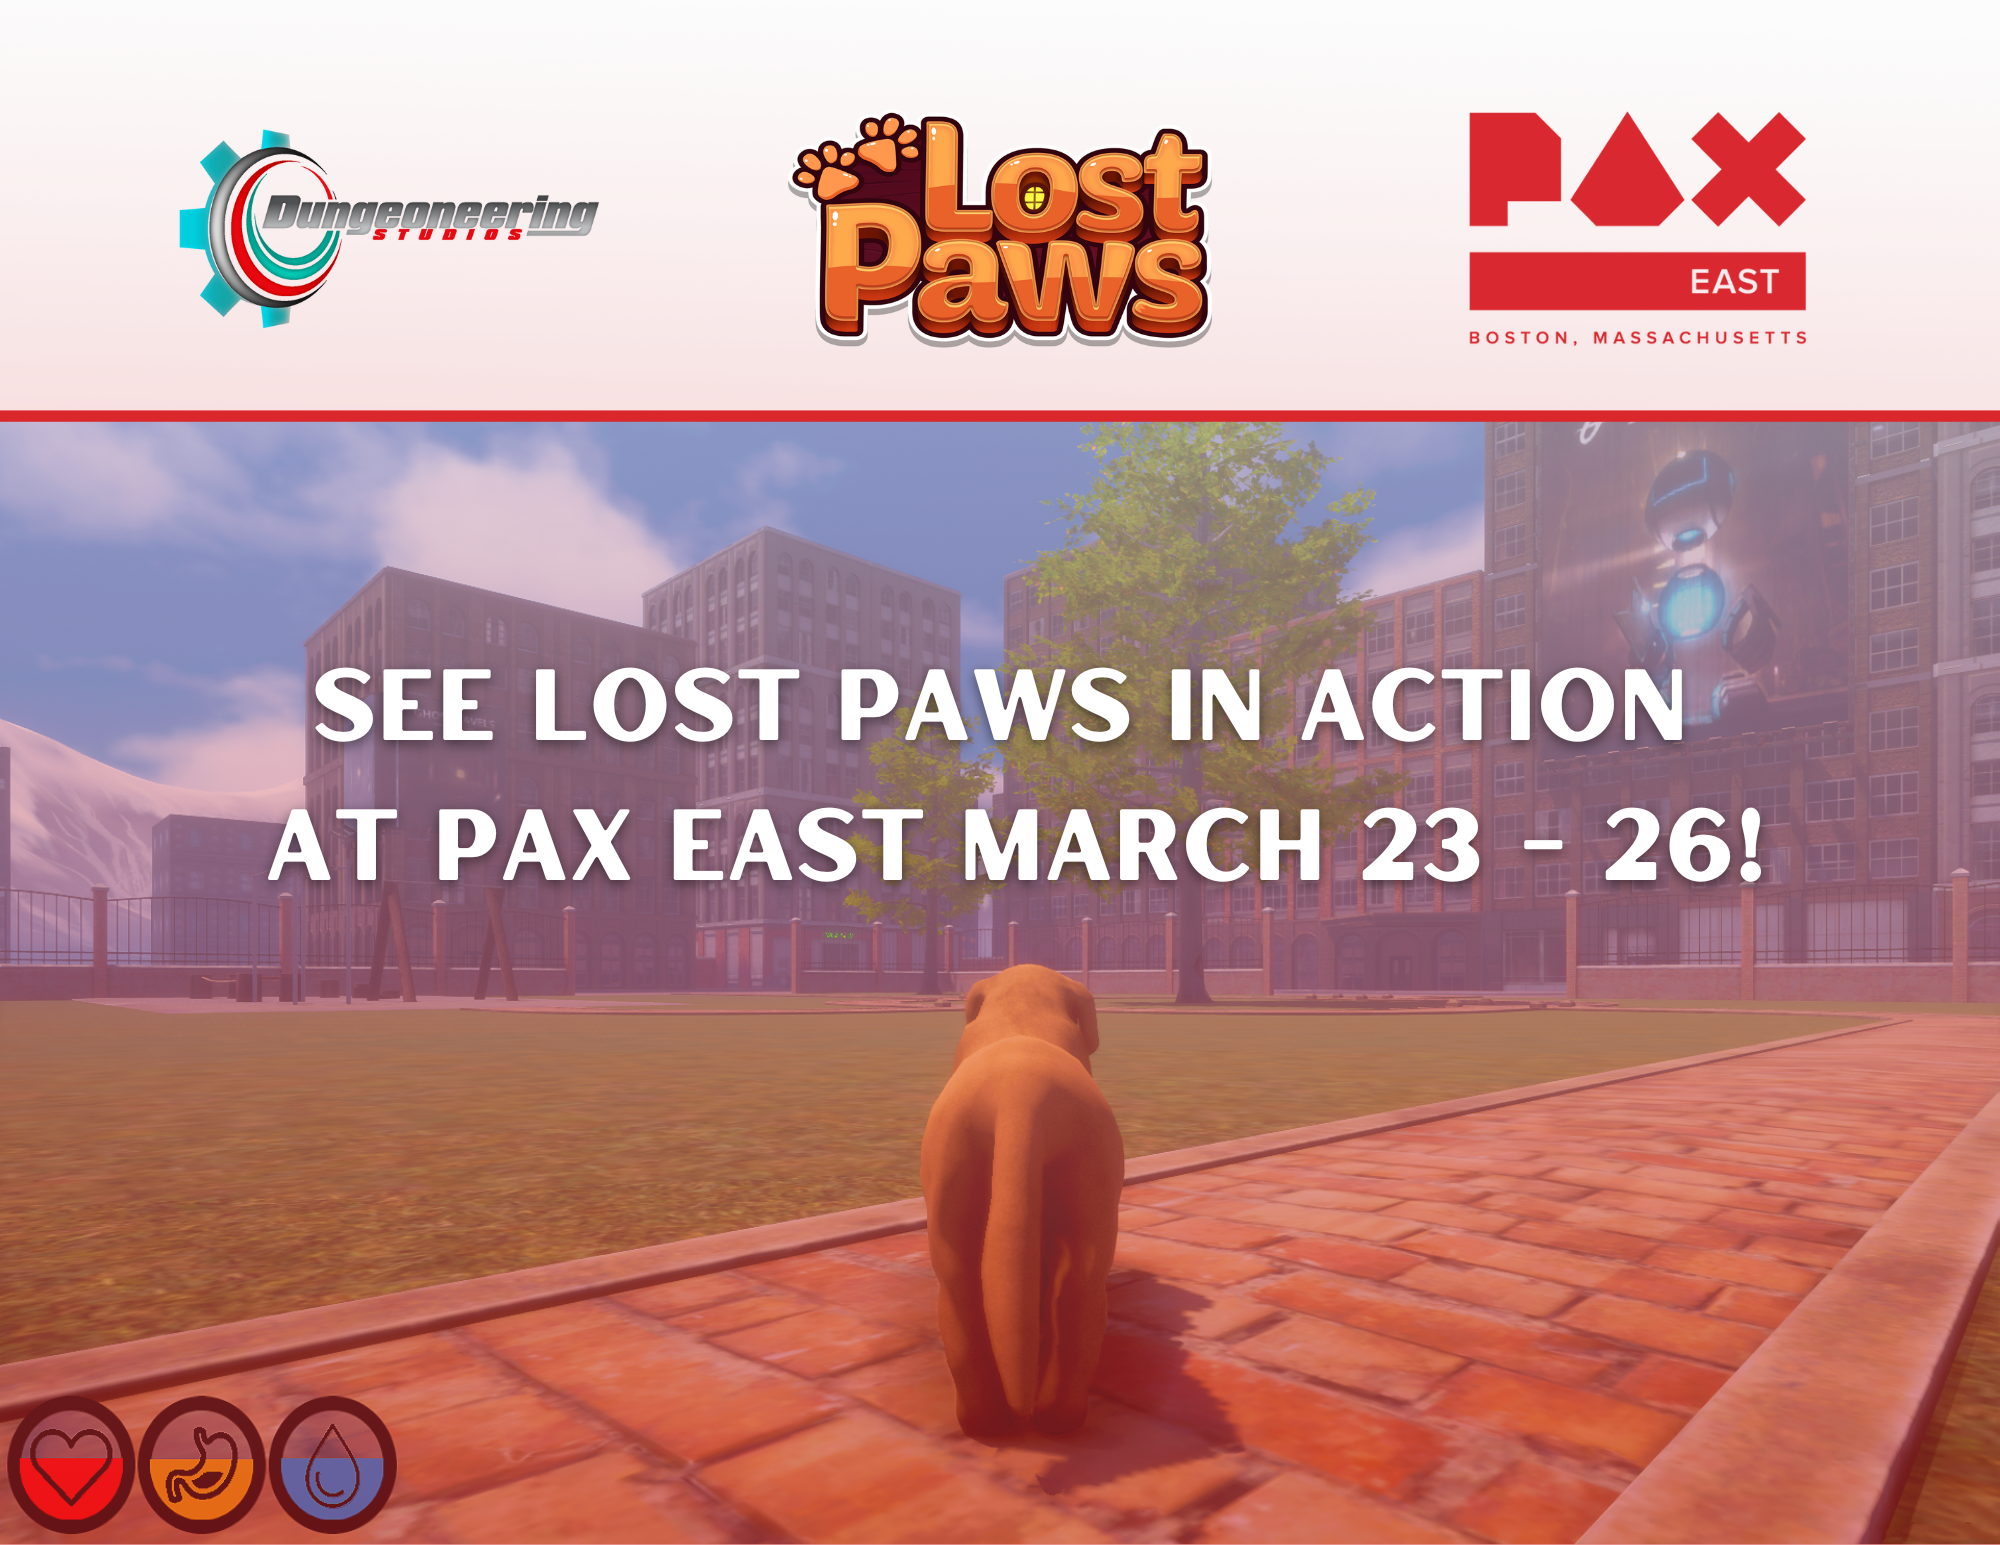 Lost Paws PAX East Flyer